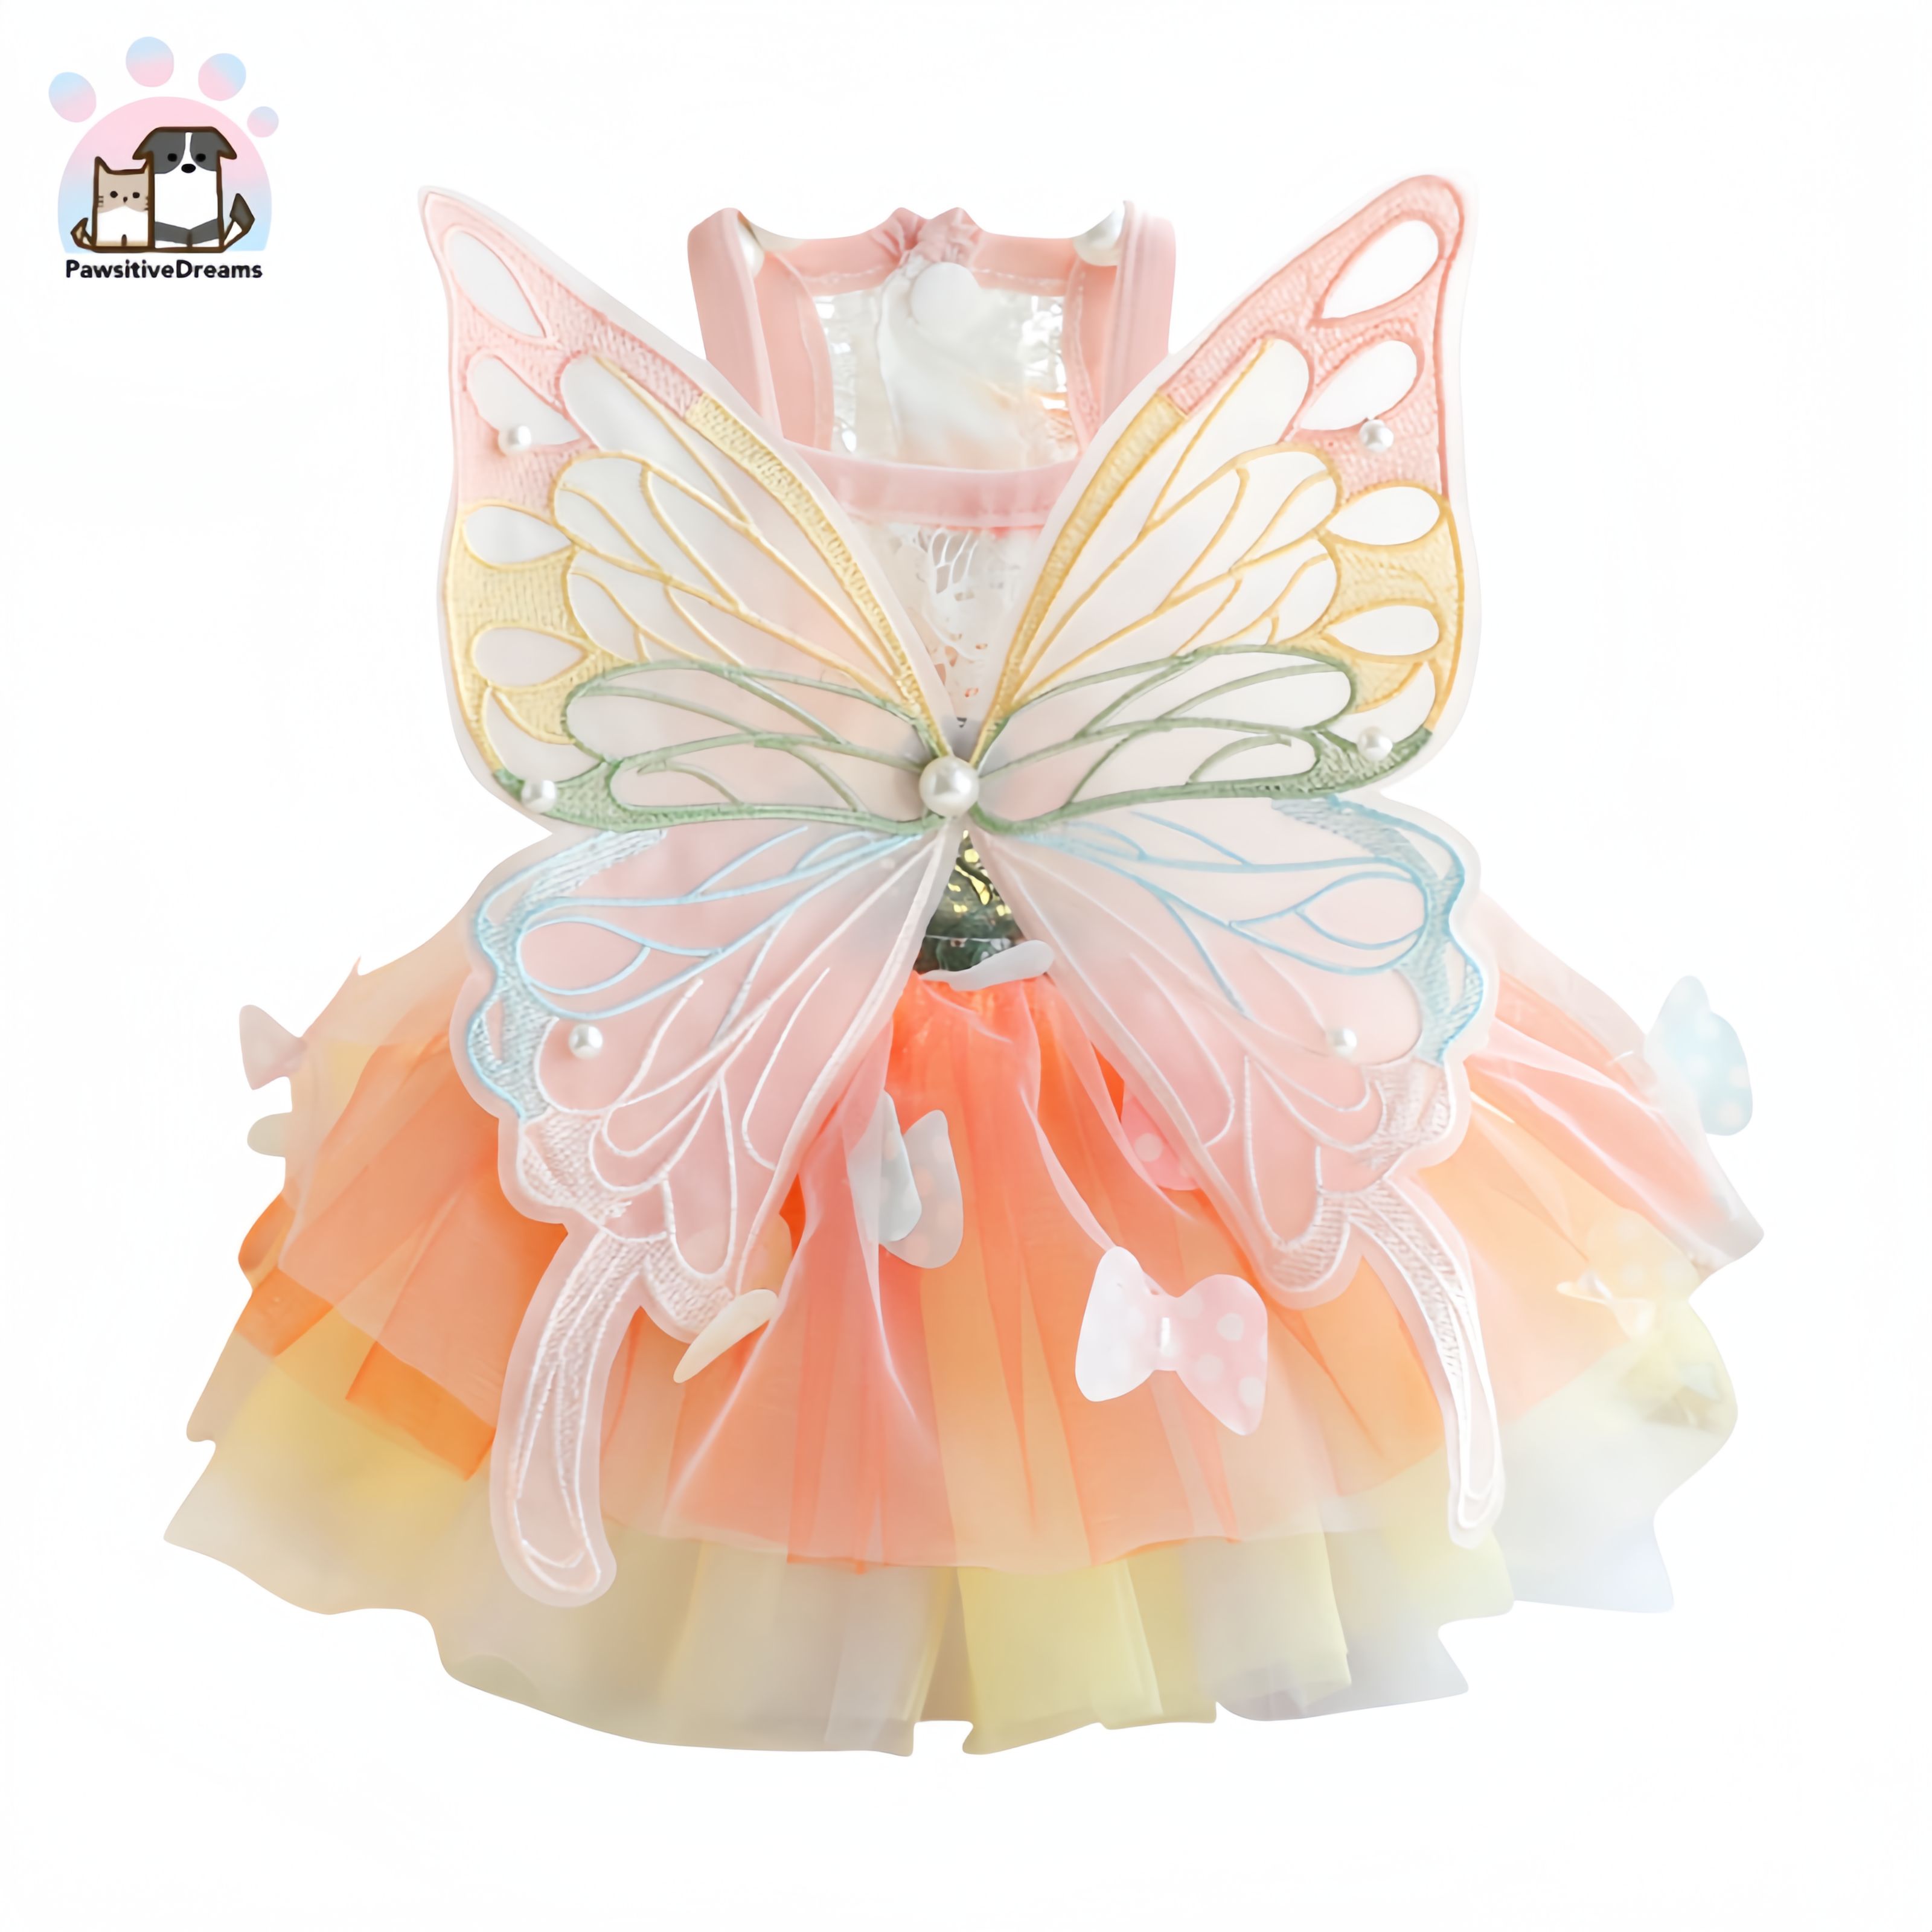 Accope Rainbow Butterfly Princess Dress With Multi-layer Tulle For Cat & Small Dog - Pawsitive Dreams